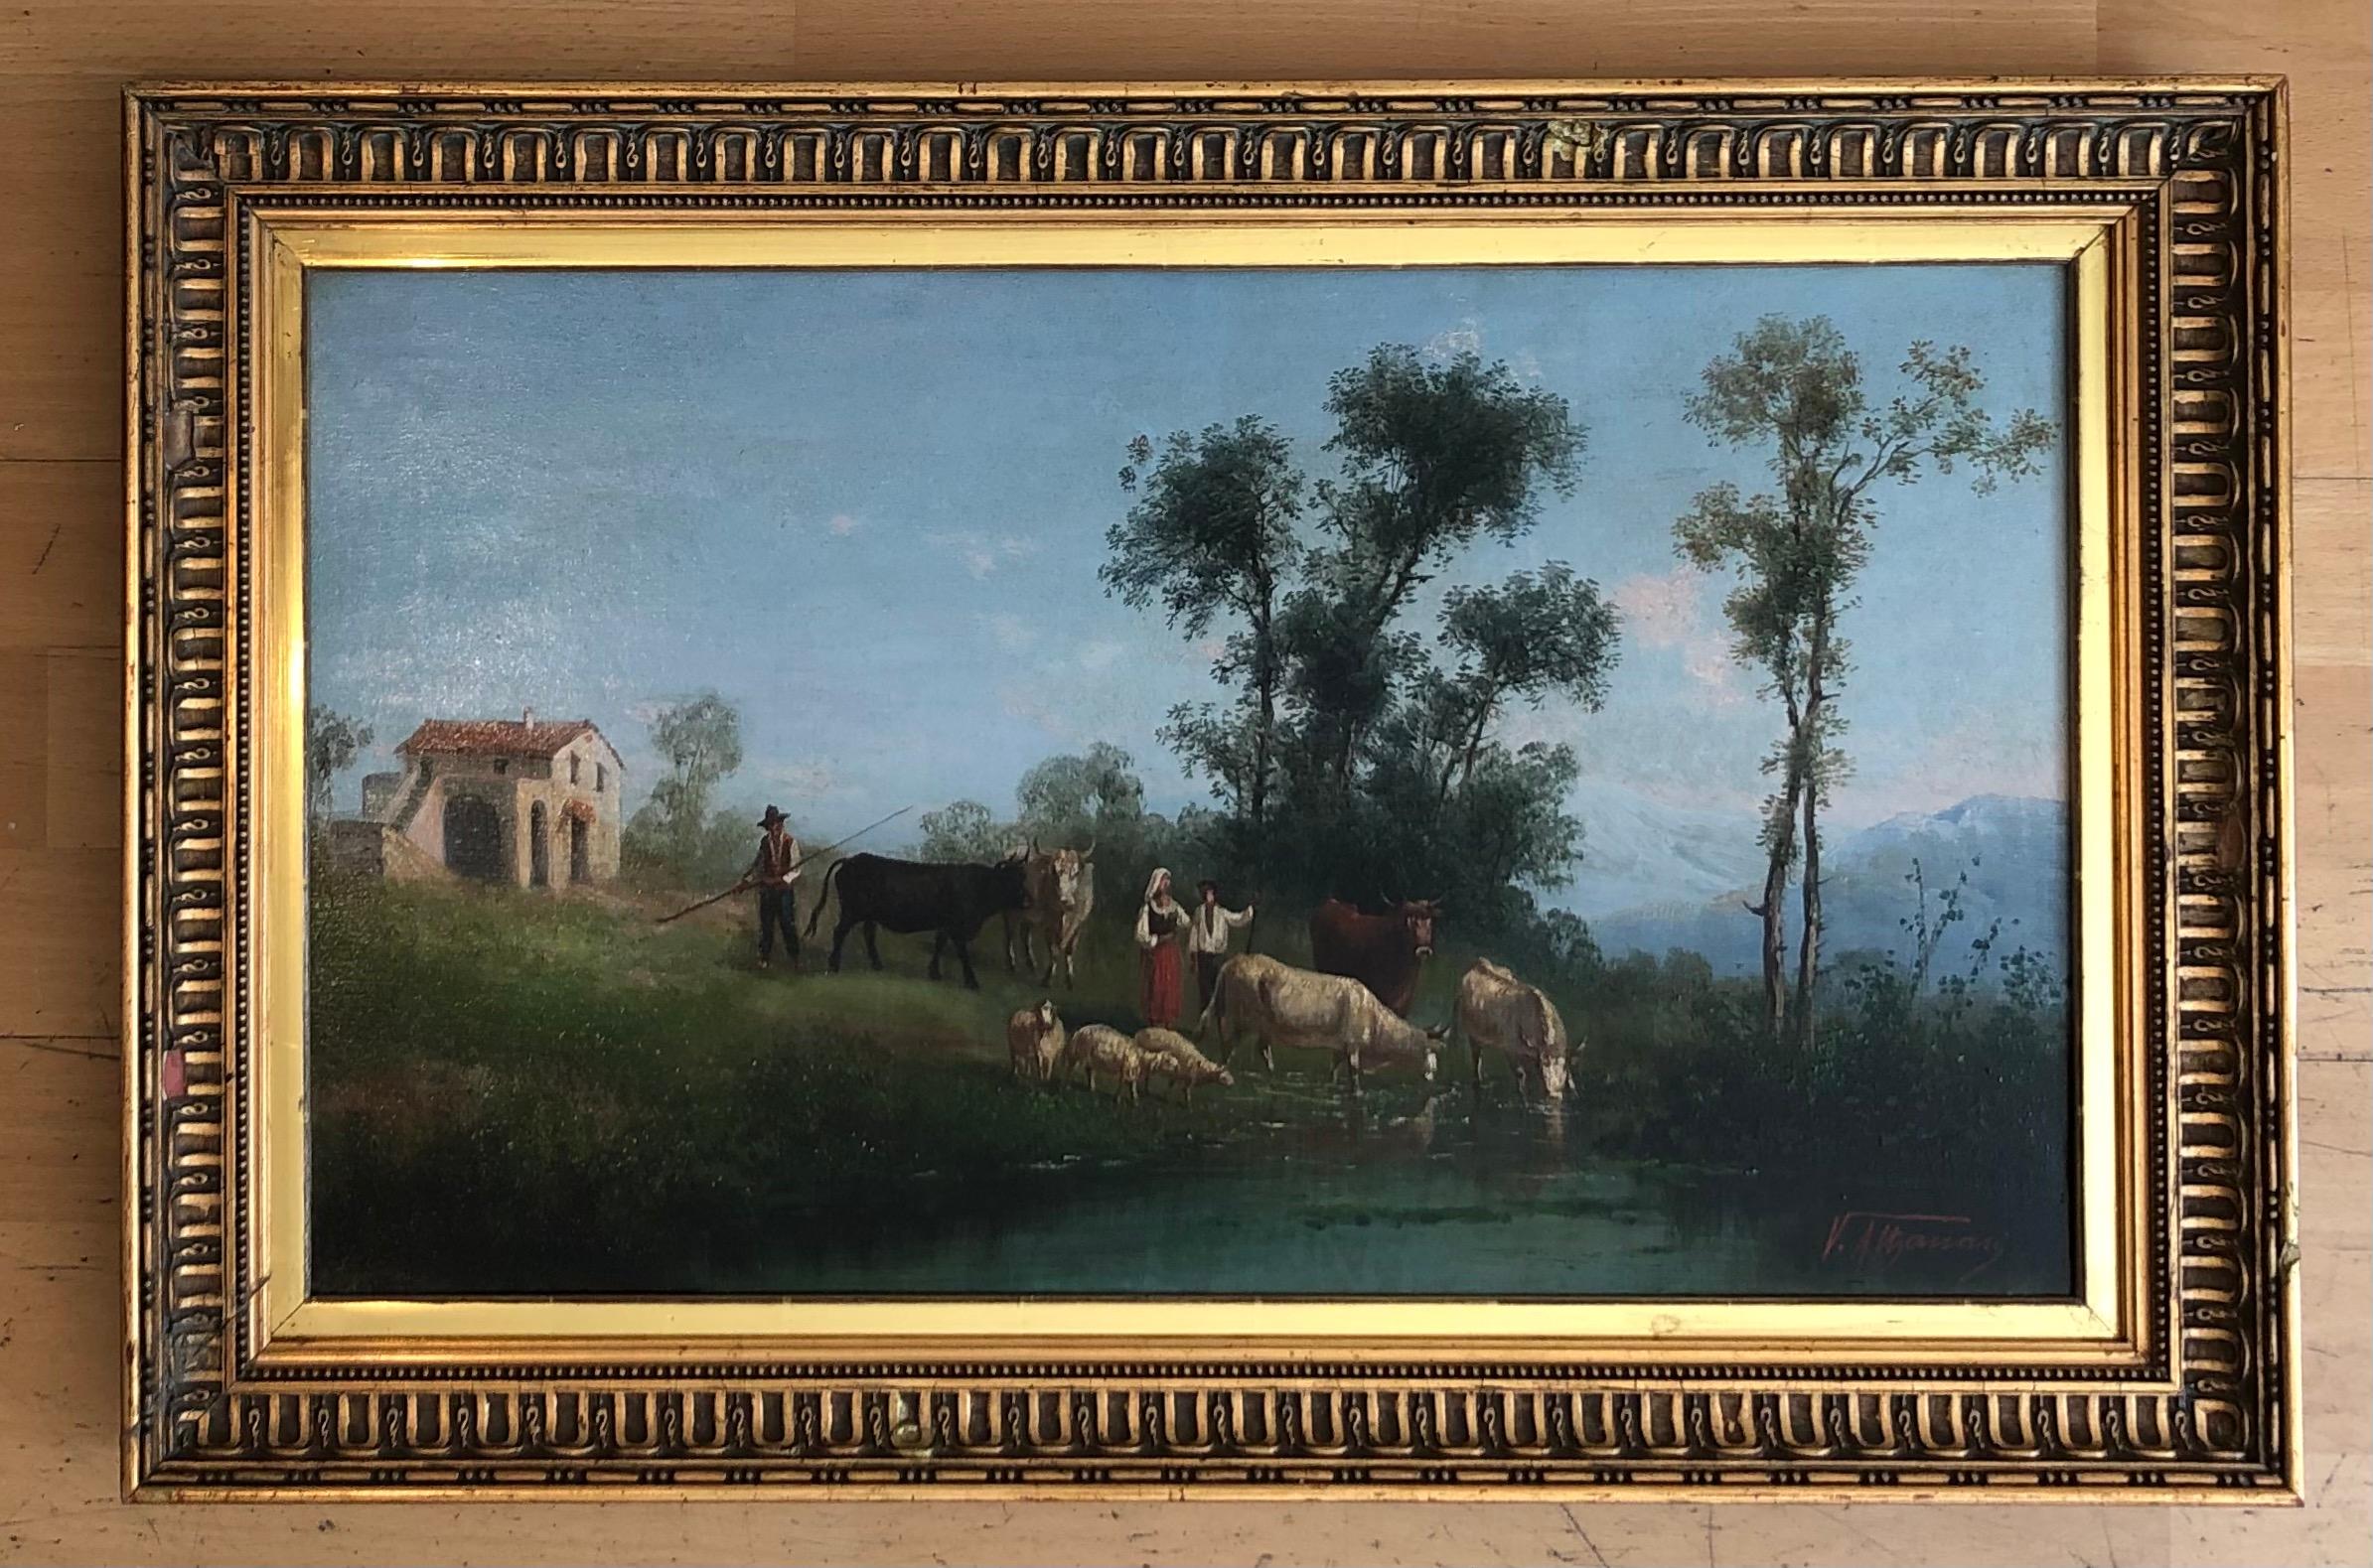 Peasants by the pond - Painting by V. Attanasi